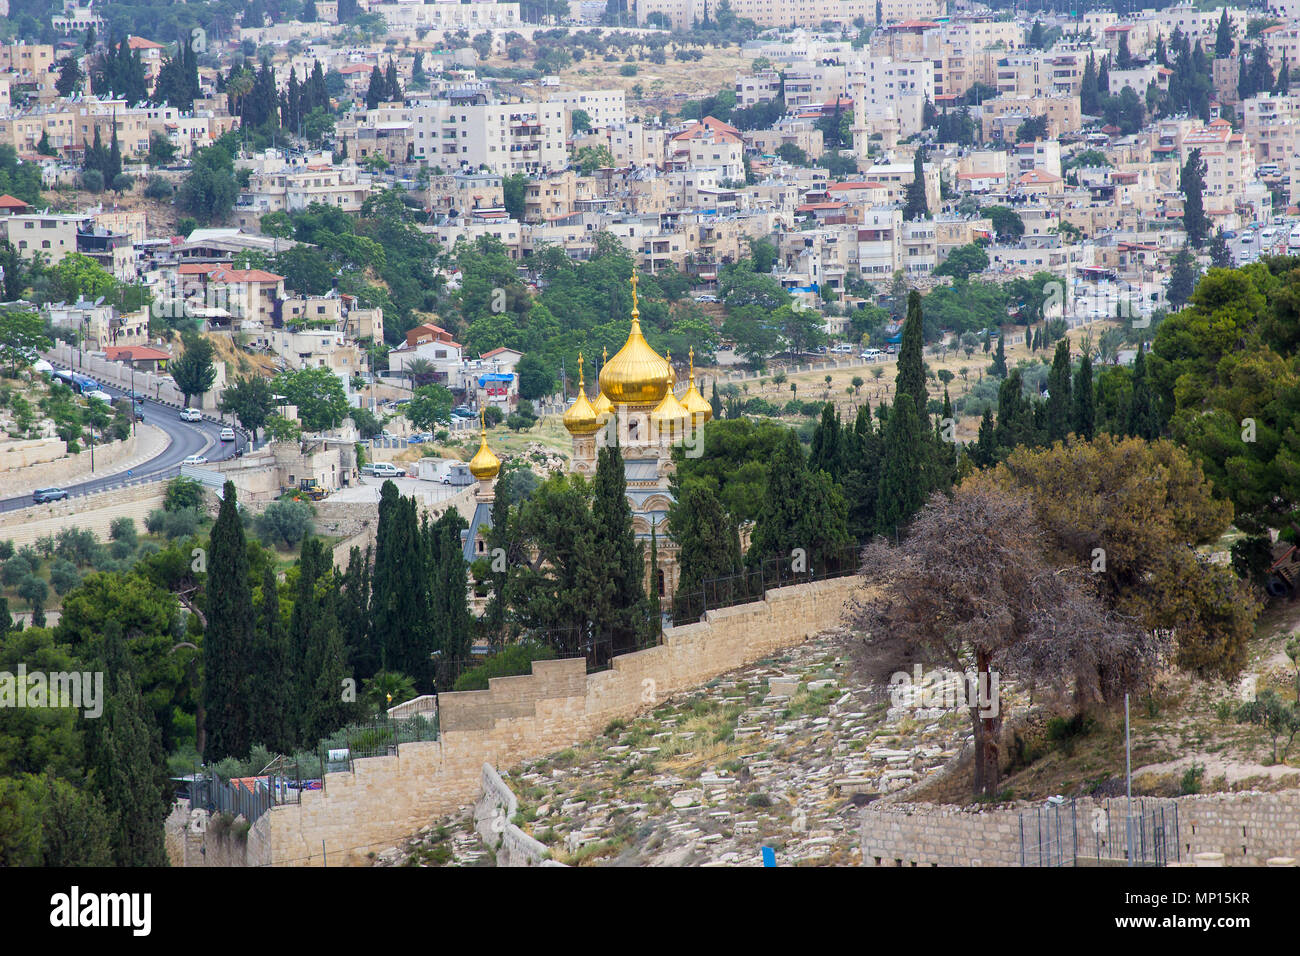 The golden rooftops of the towers on the ancient Russian Orthodox Church in the City of Jerusalem in Israel seen from the Mount of Olives Stock Photo